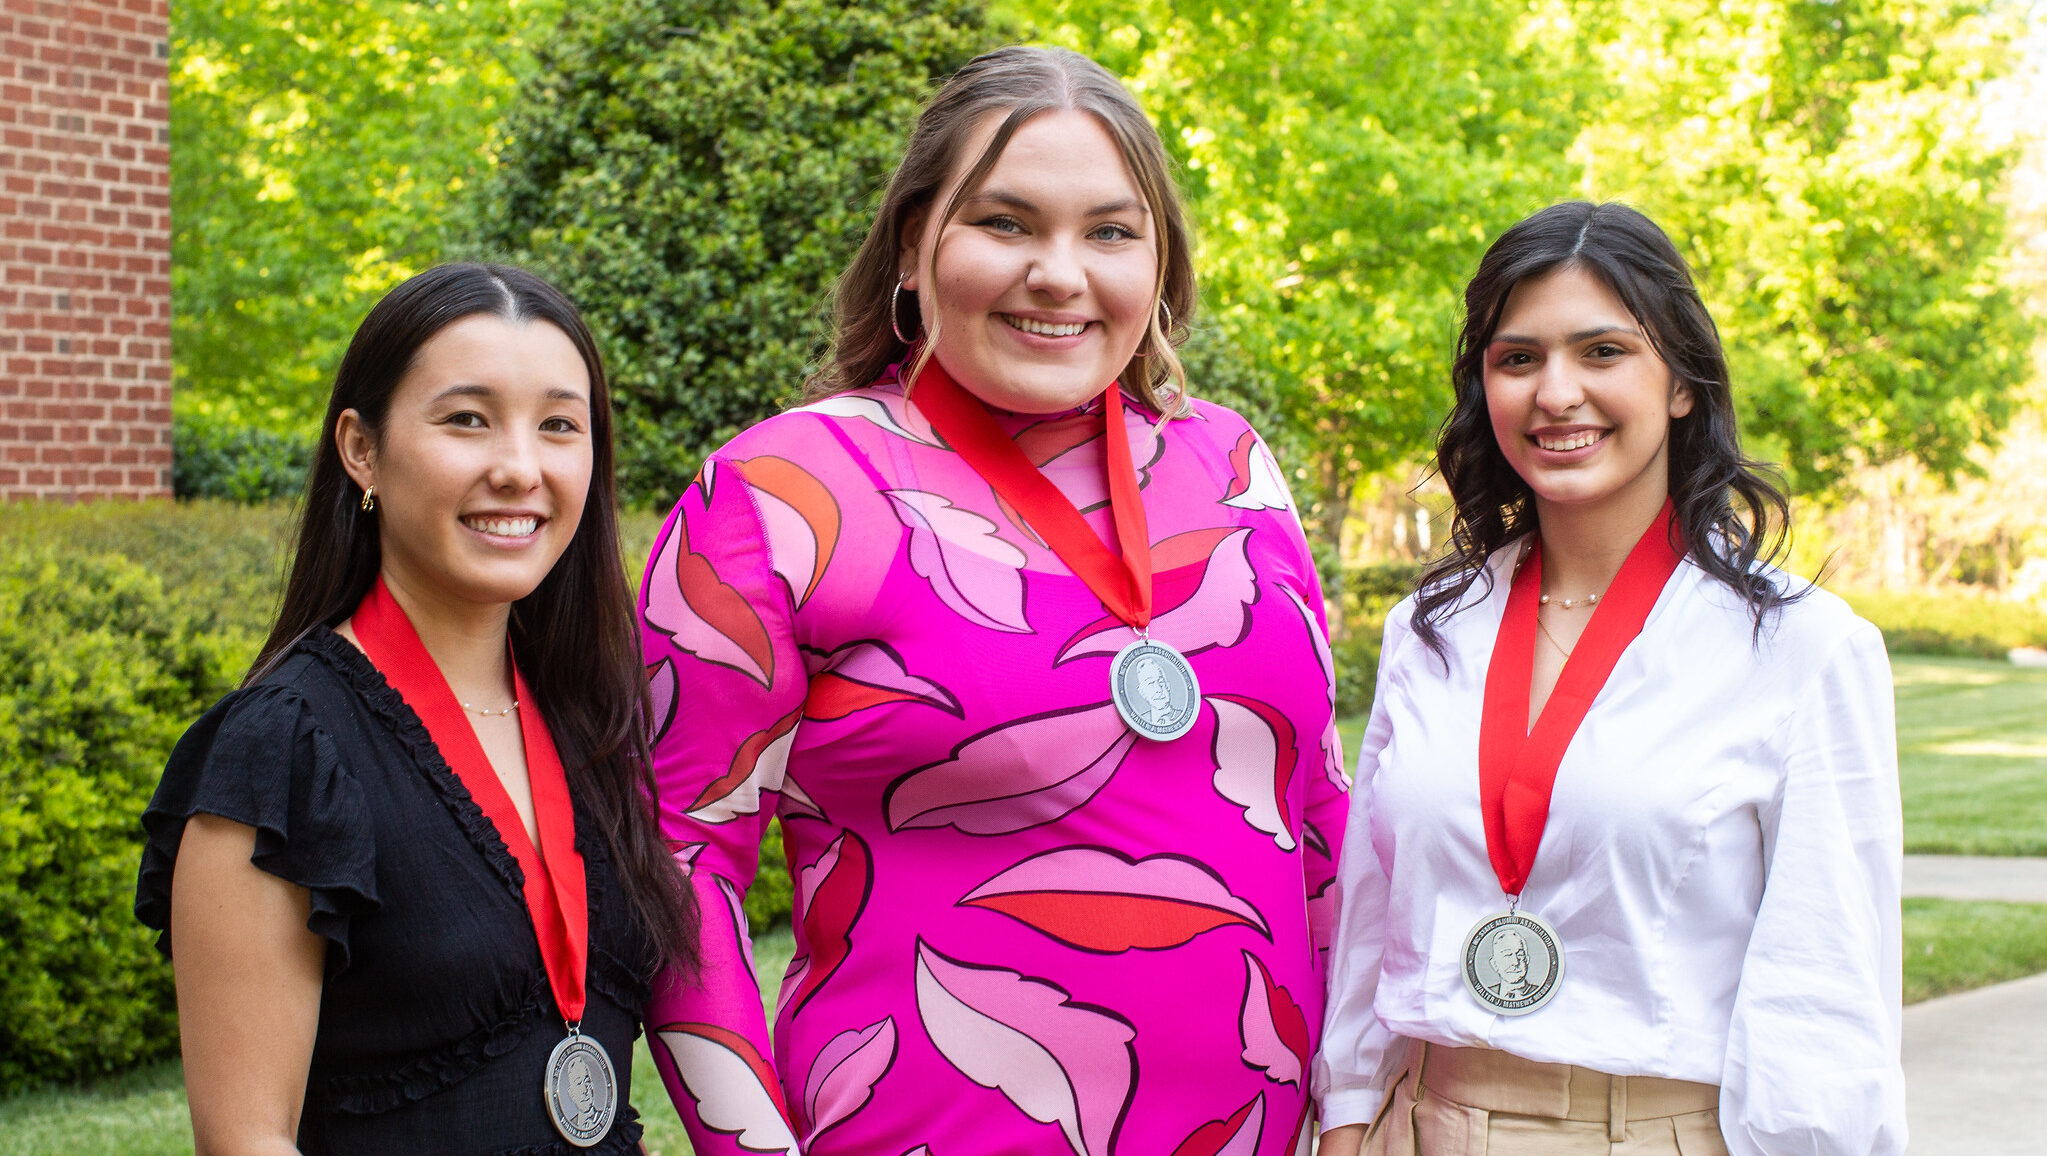 The Mathews Medal recognizes graduating seniors who have created a lasting legacy at NC State.